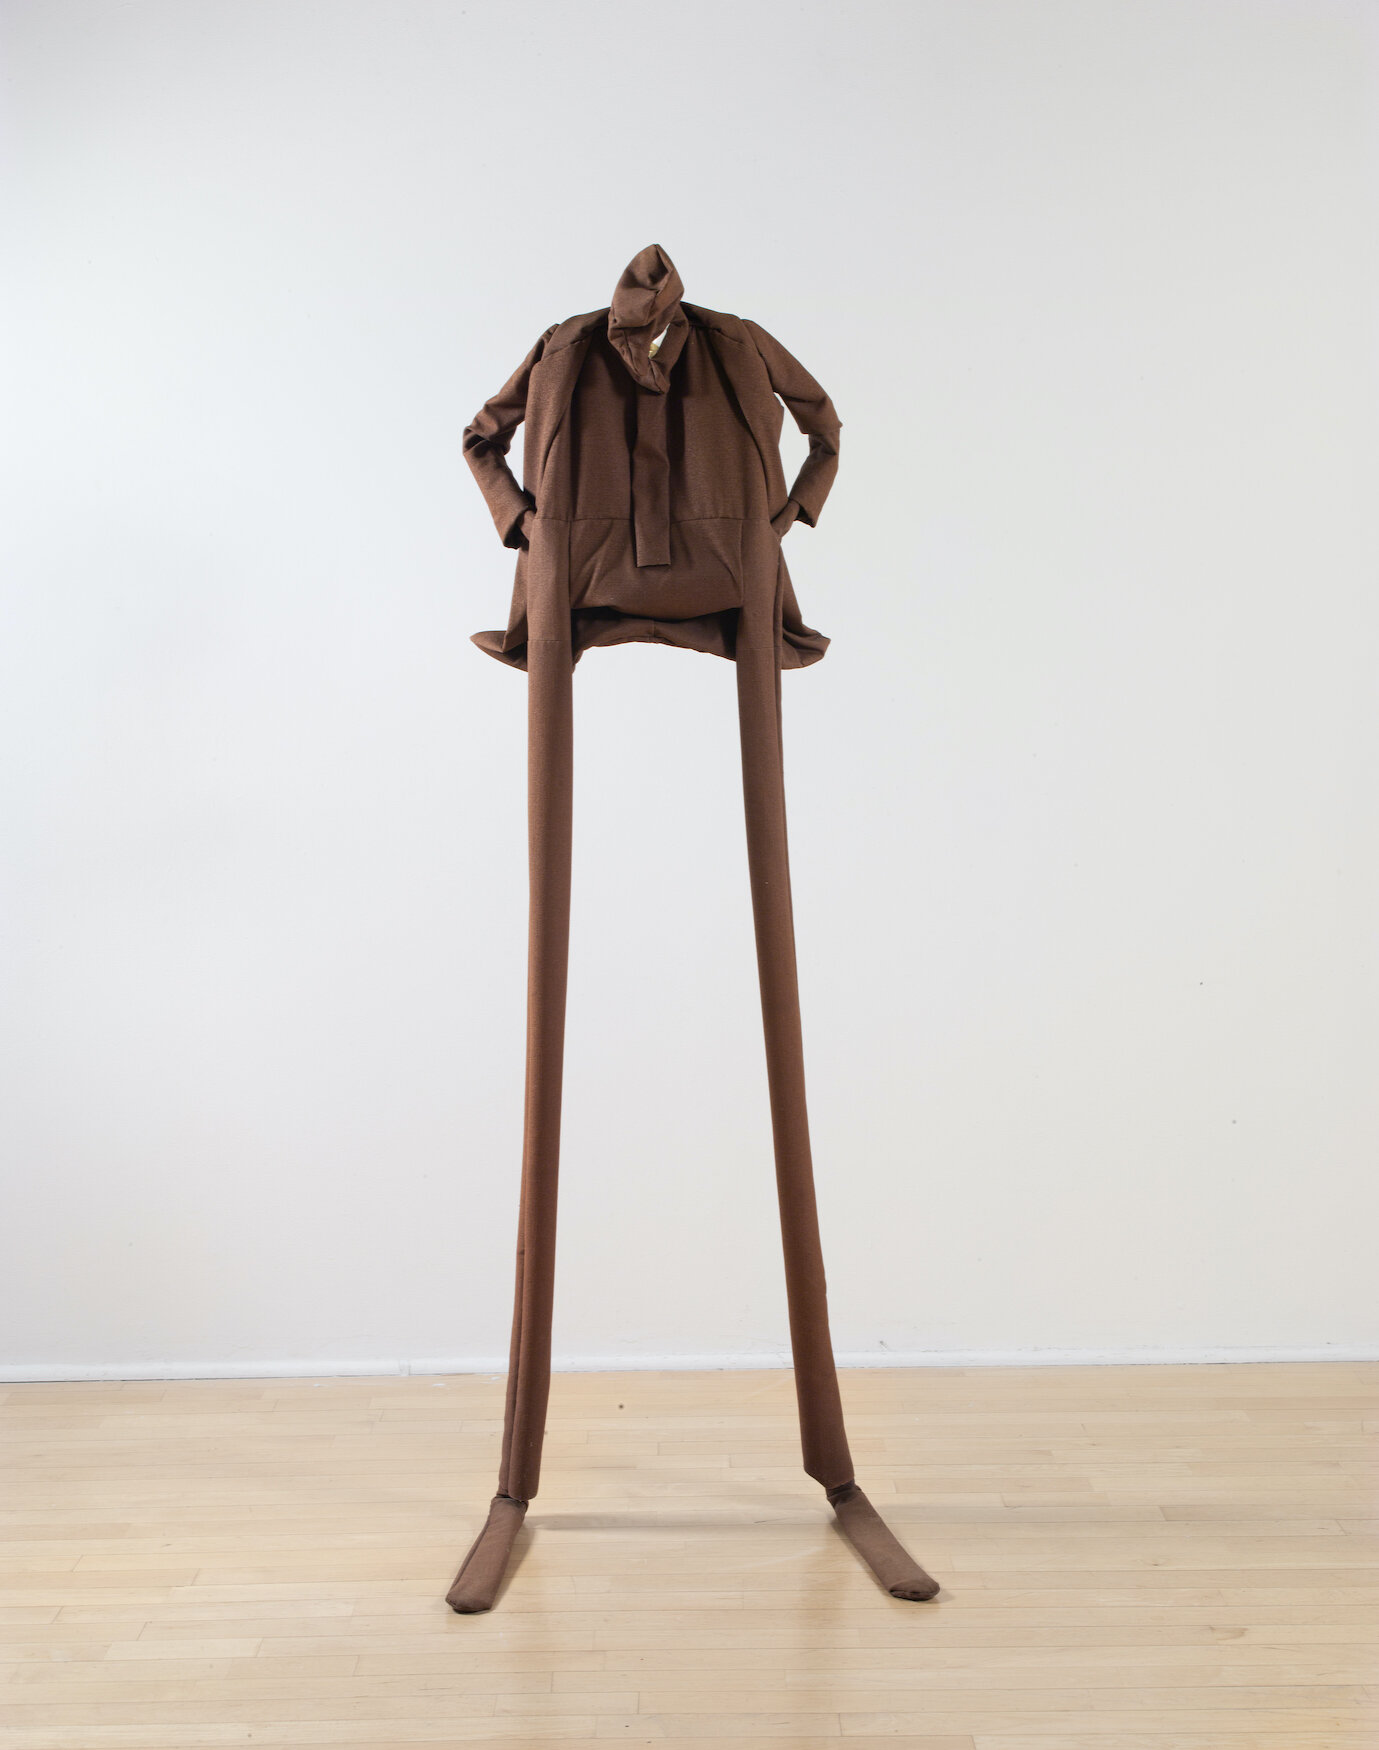  William King,  Victory,  2008, Vinyl, polyester, aluminum armature, 79 x 30 x 18.5 inches   